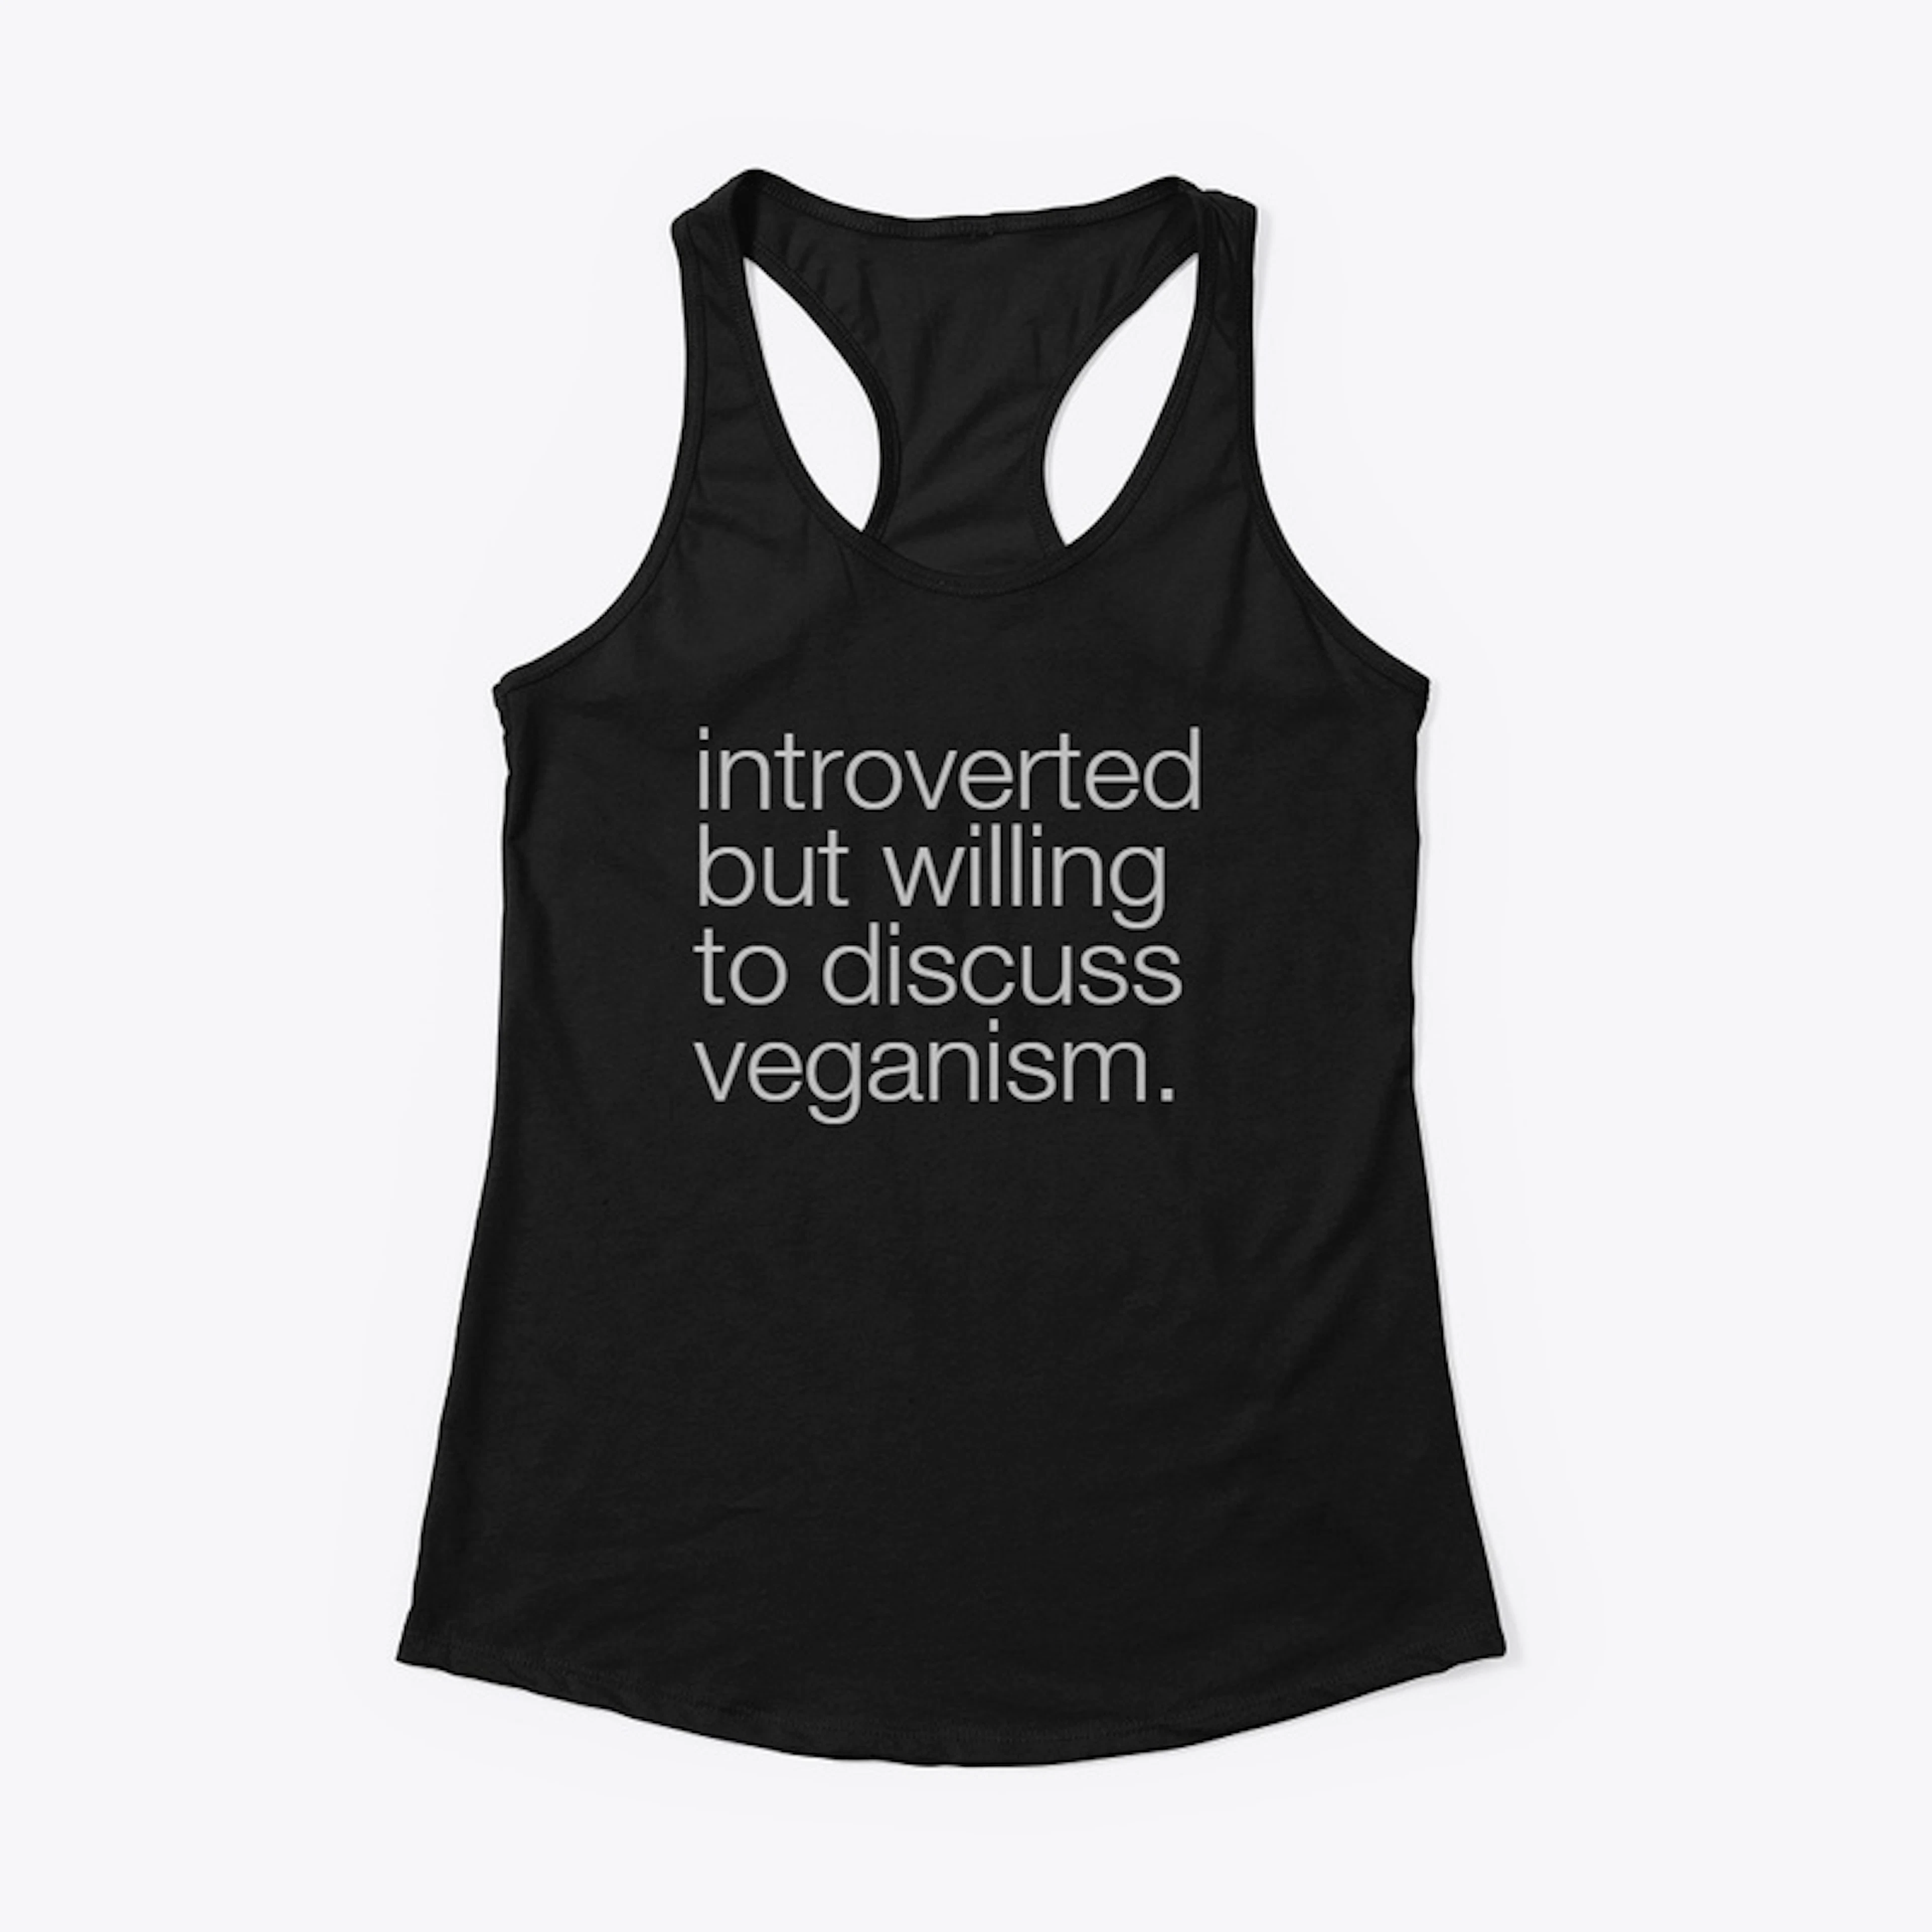 Introverted but willing to discuss…